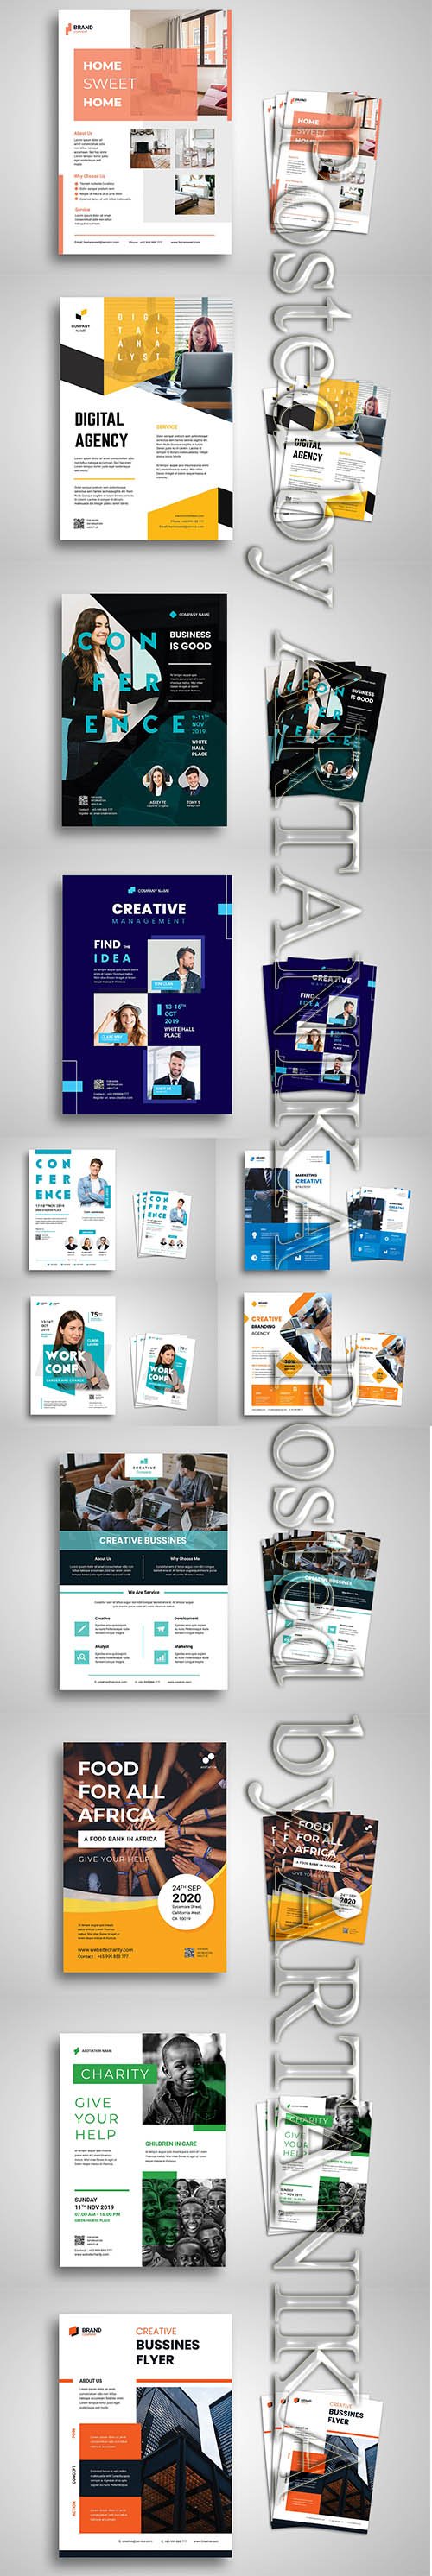 Business, Marketing and Seminar Flyer Promo Template Set